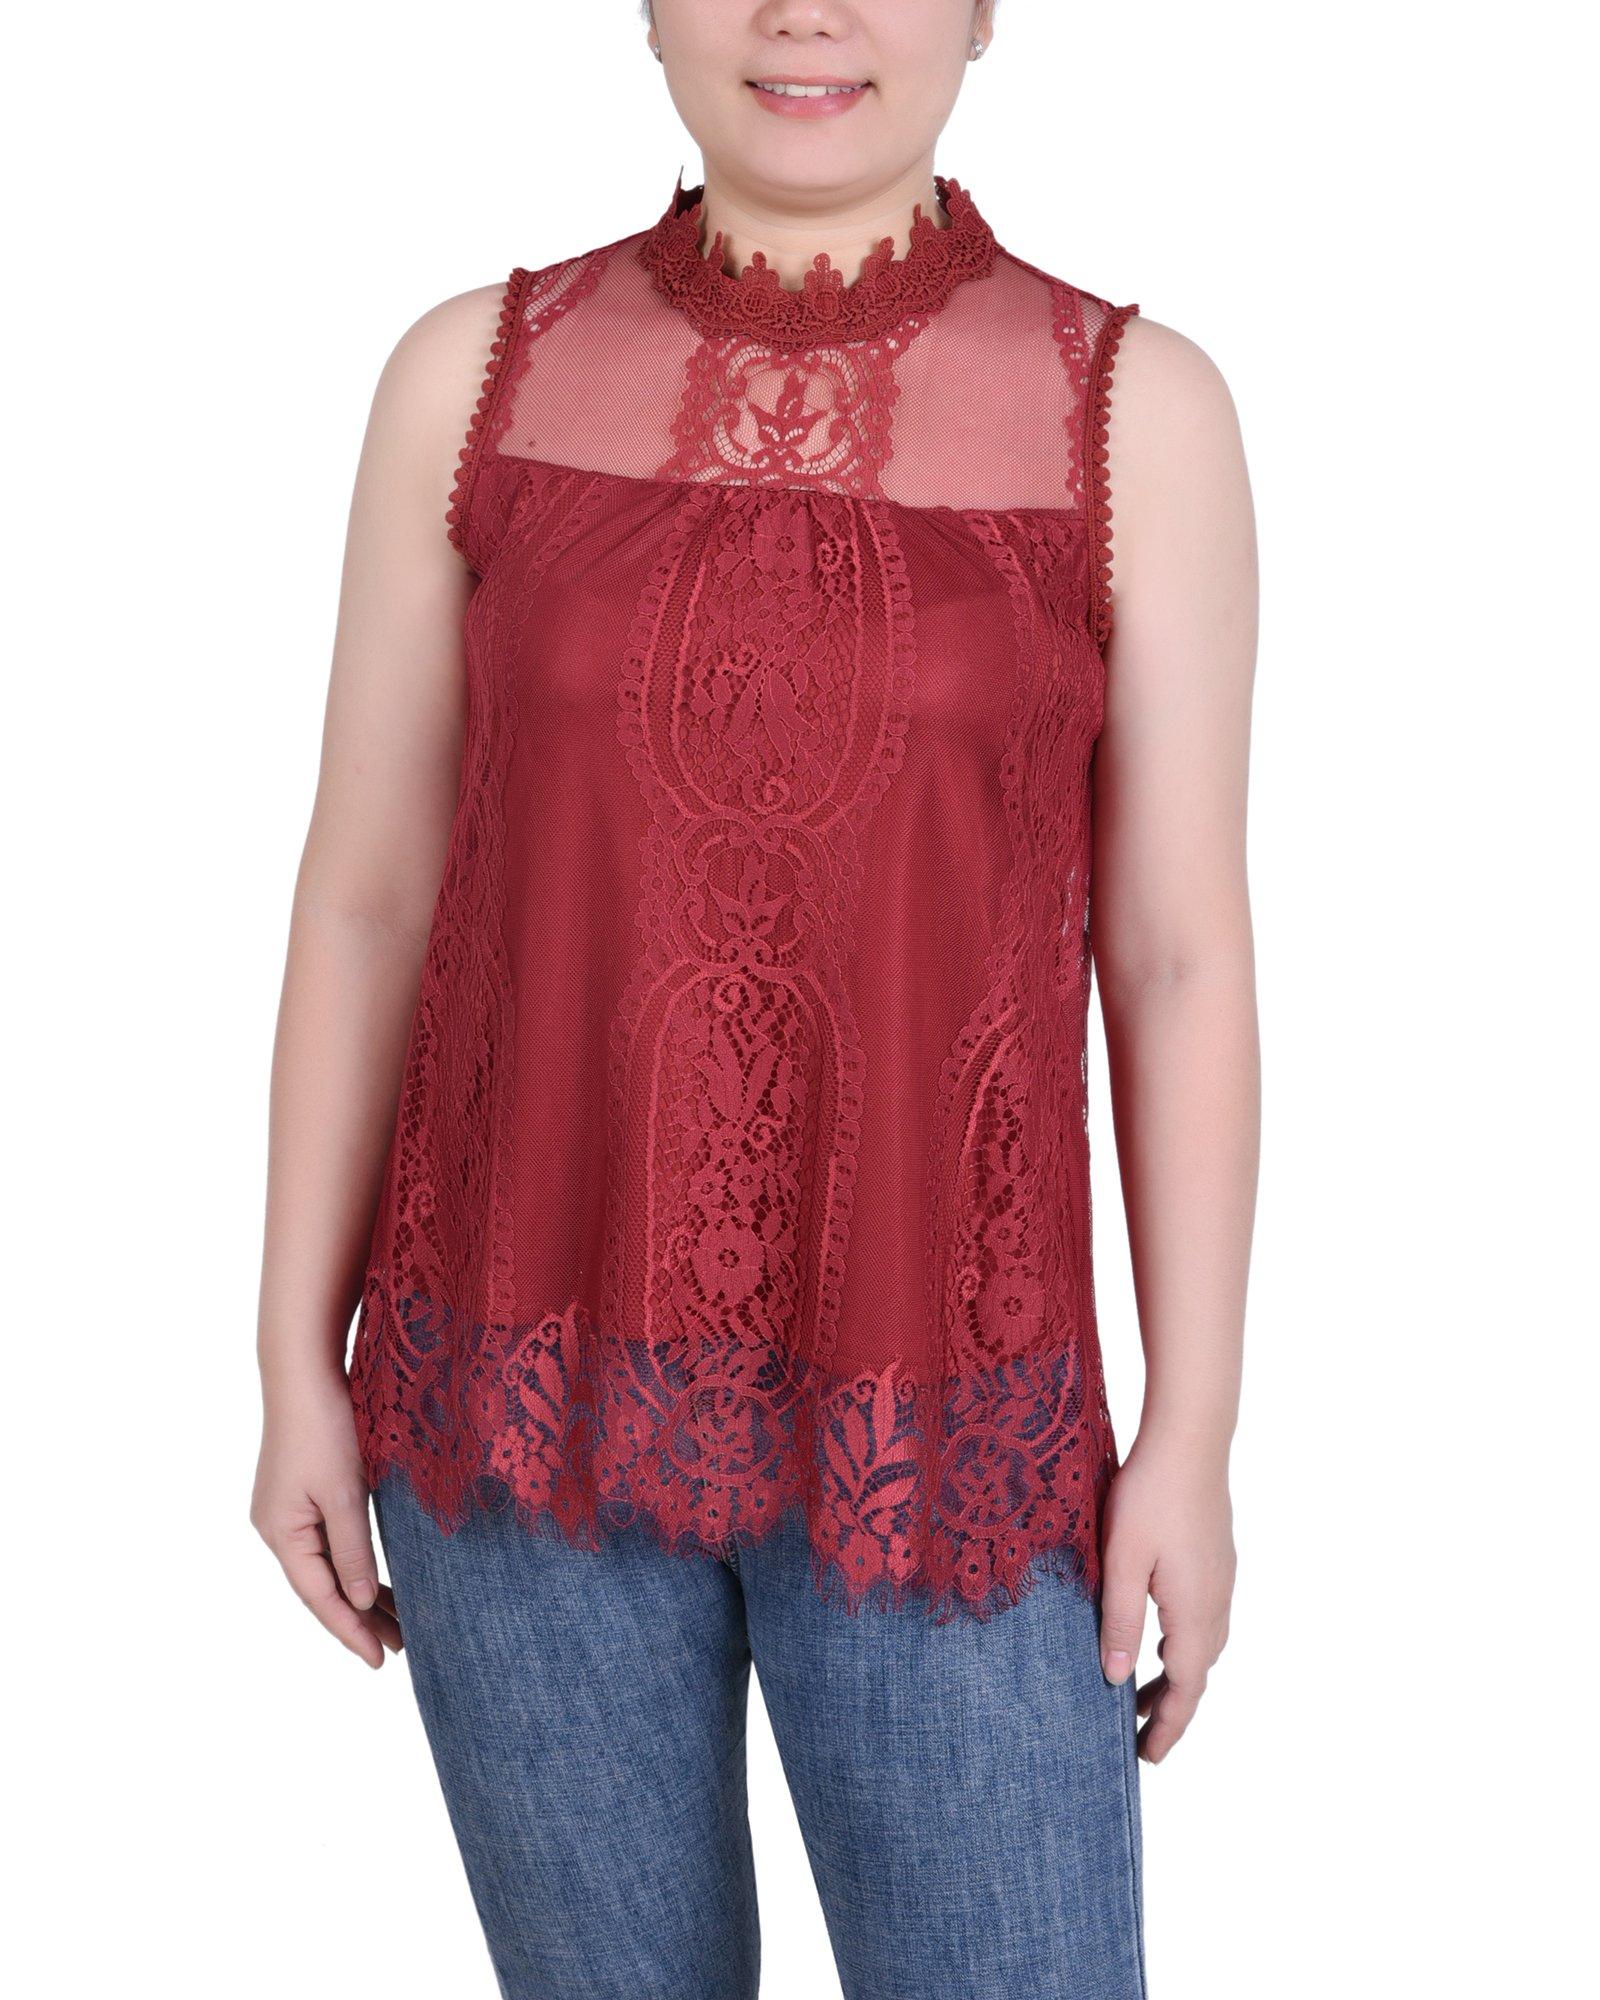 NY Collection Womens Sleeveless Mock Neck Lace Top